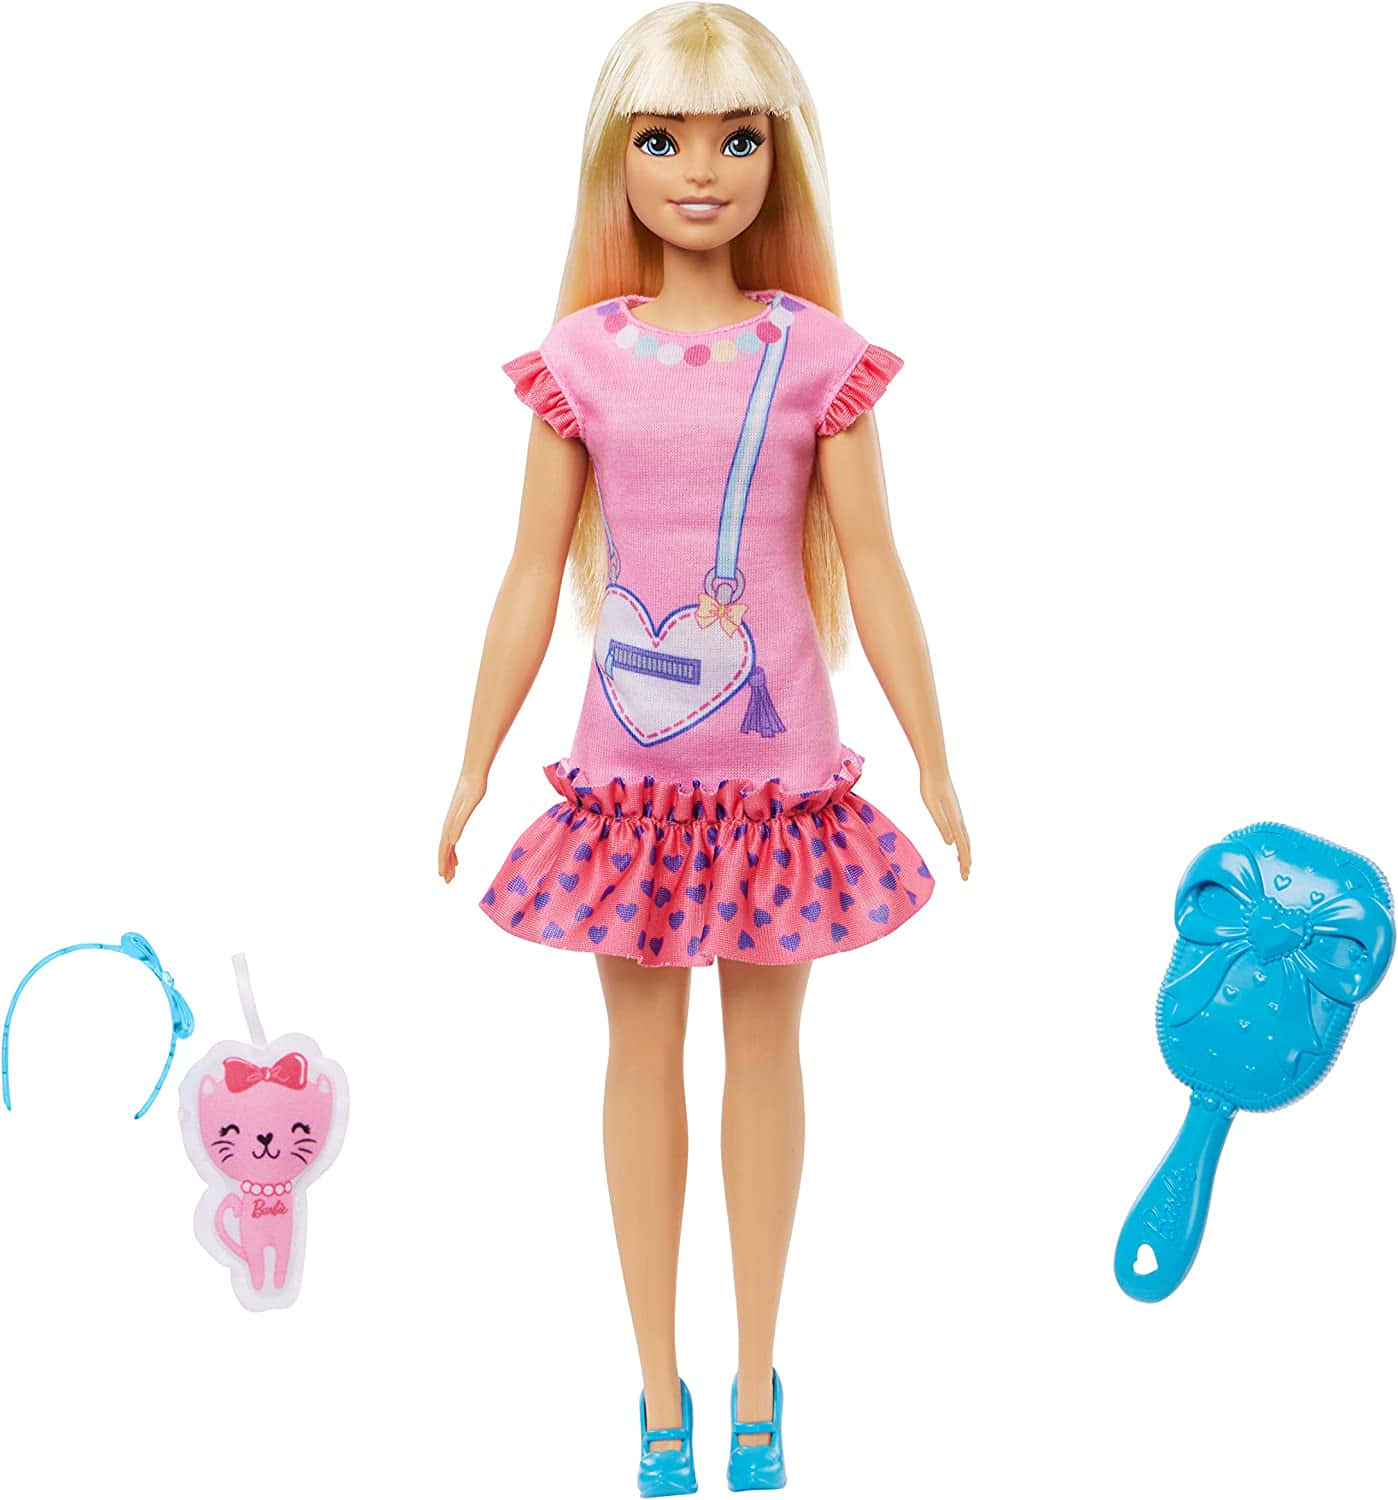 Barbie Doll With Pink Dress And Accessories